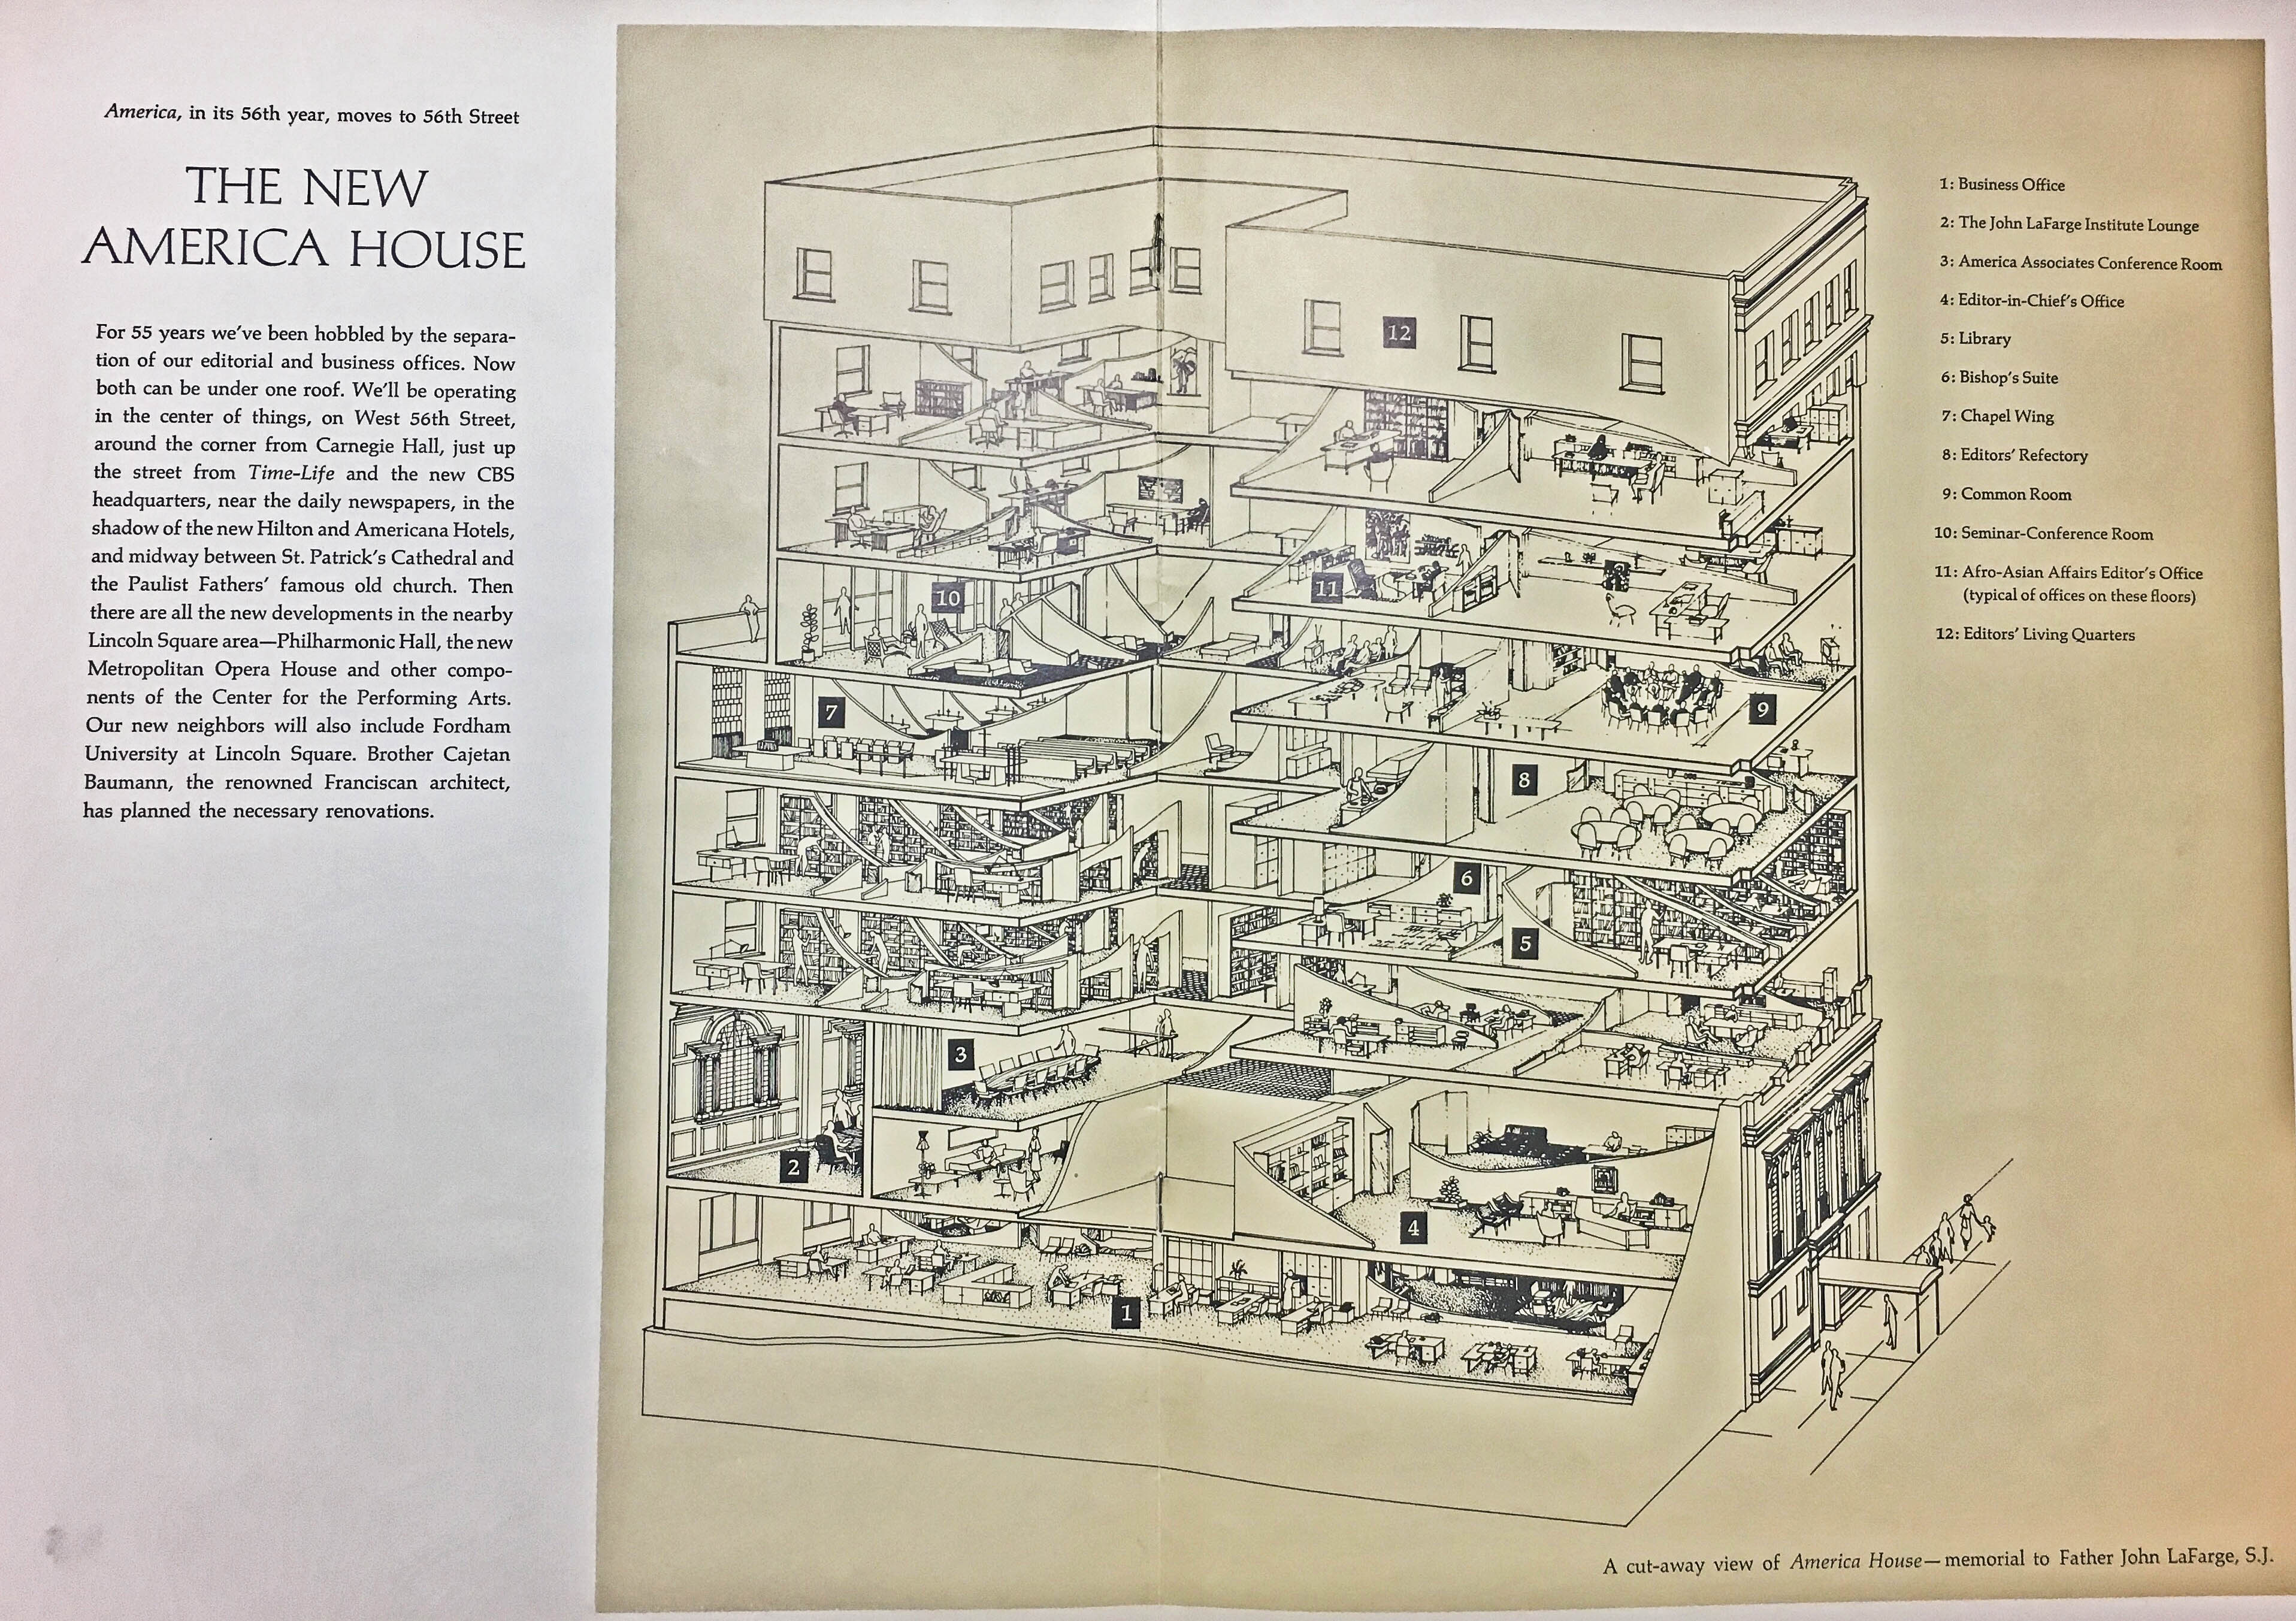 A spread from a folio promoting America House when it opened in the early 1960s.